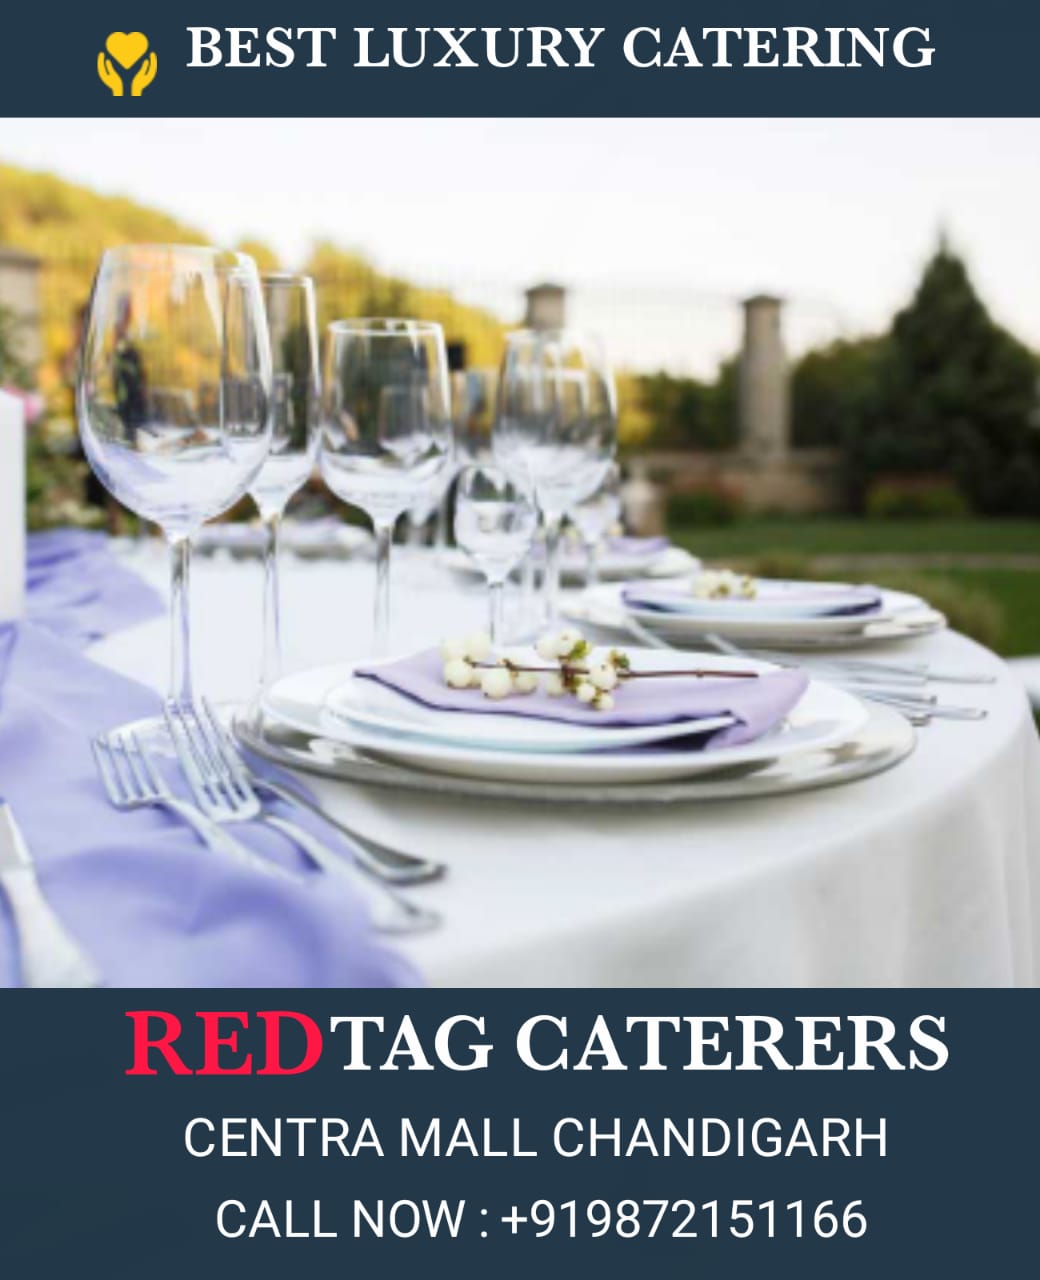 balance and taste of cuisines catering service in Mohali punjab. | Red Tag Caterers | Luxury catering service in Mohali punjab, best quality catering service in Mohali punjab, famous catering service in Mohali punjab, best wedding catering service in Mohali punjab,professional catering - GL46760